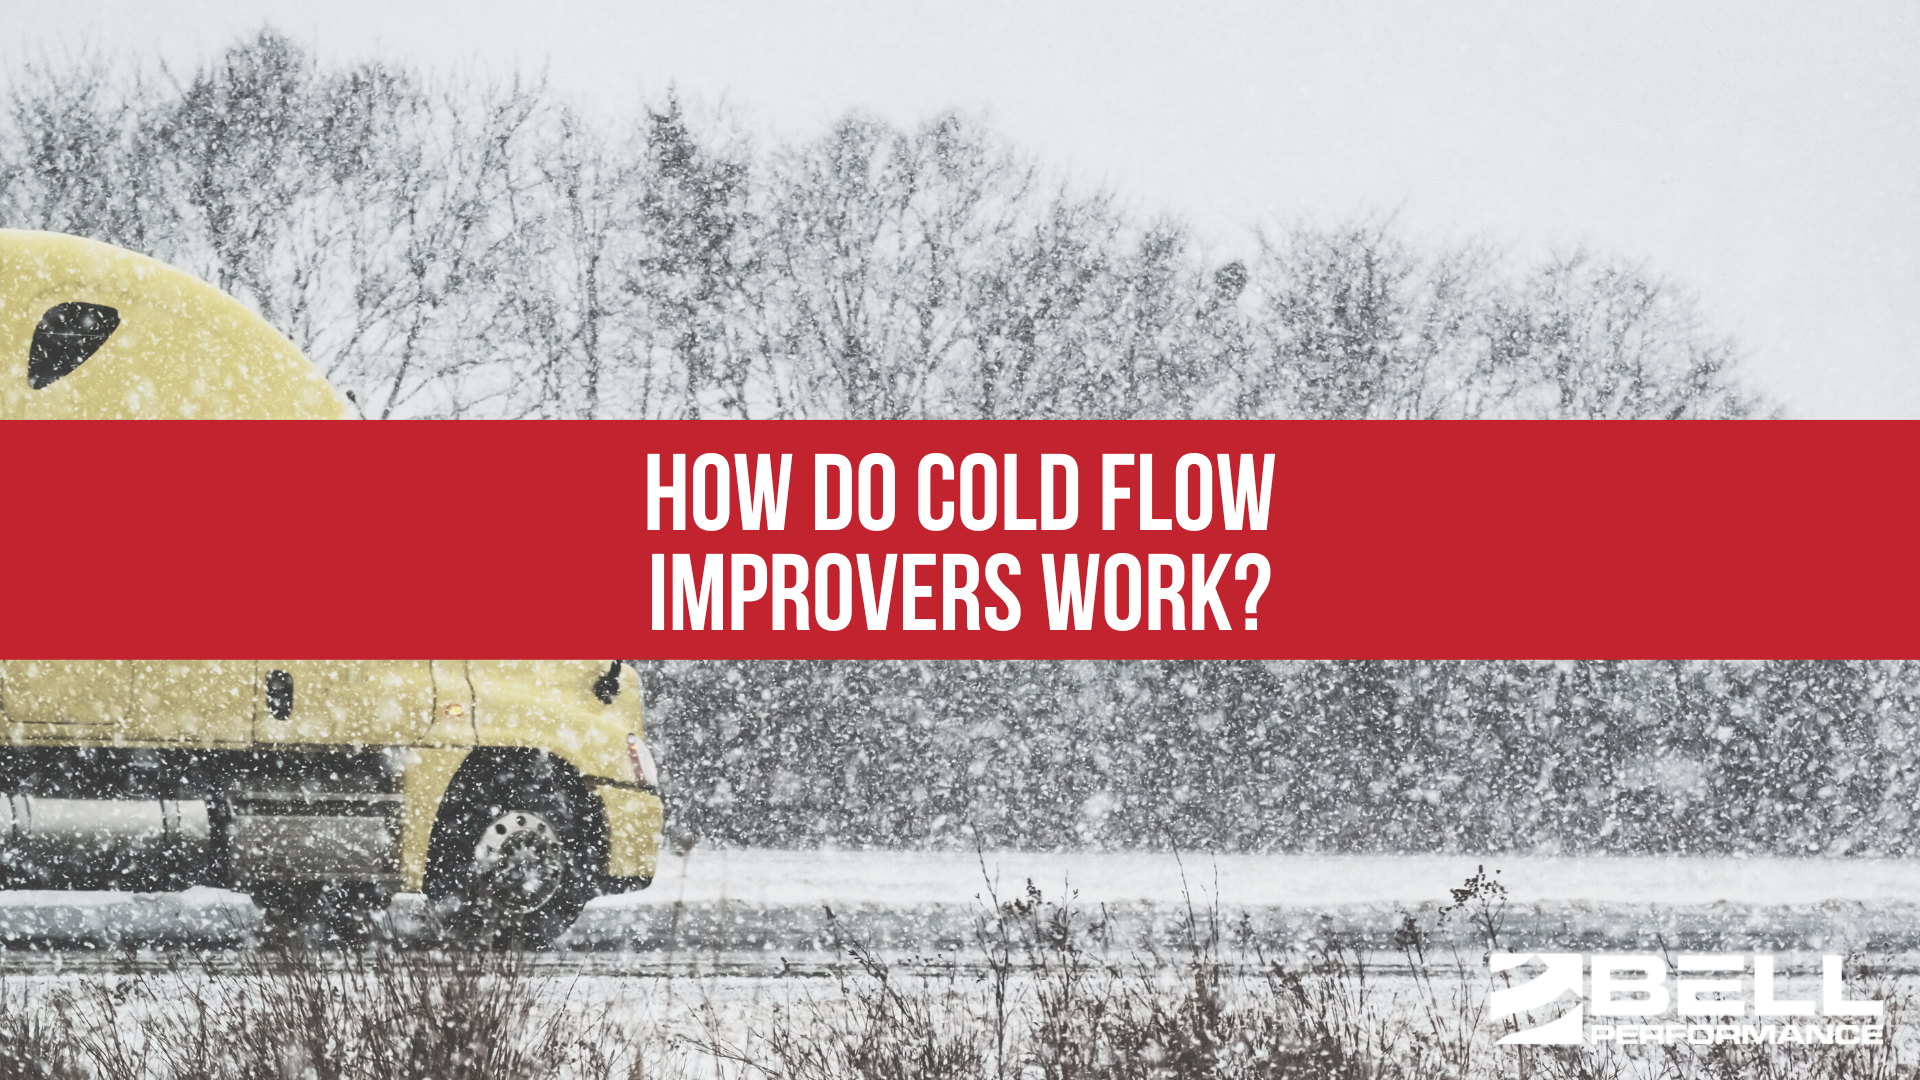 How do cold flow improvers work?